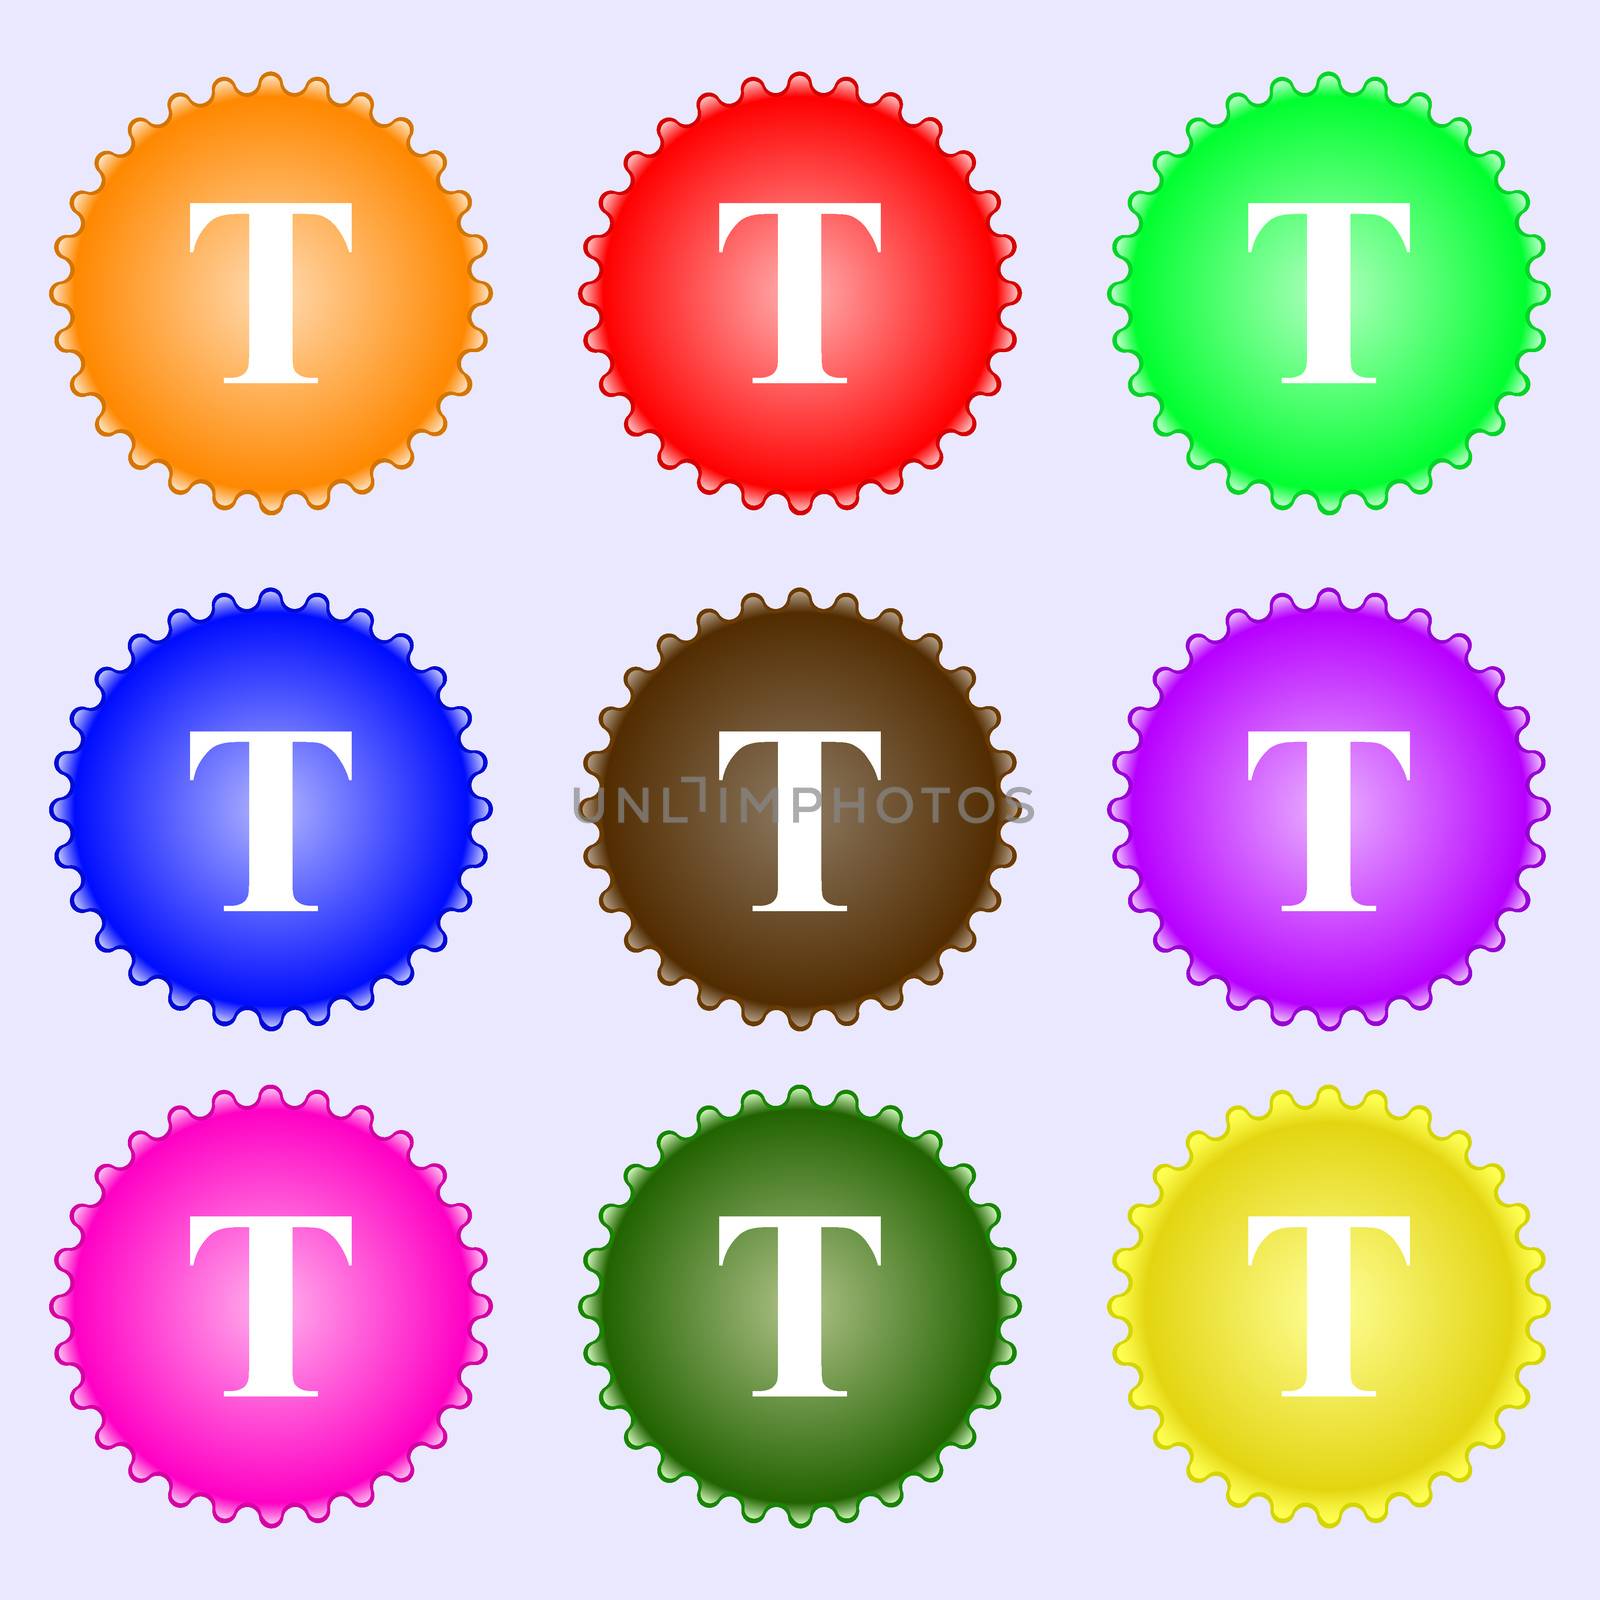 Text edit icon sign. A set of nine different colored labels. illustration